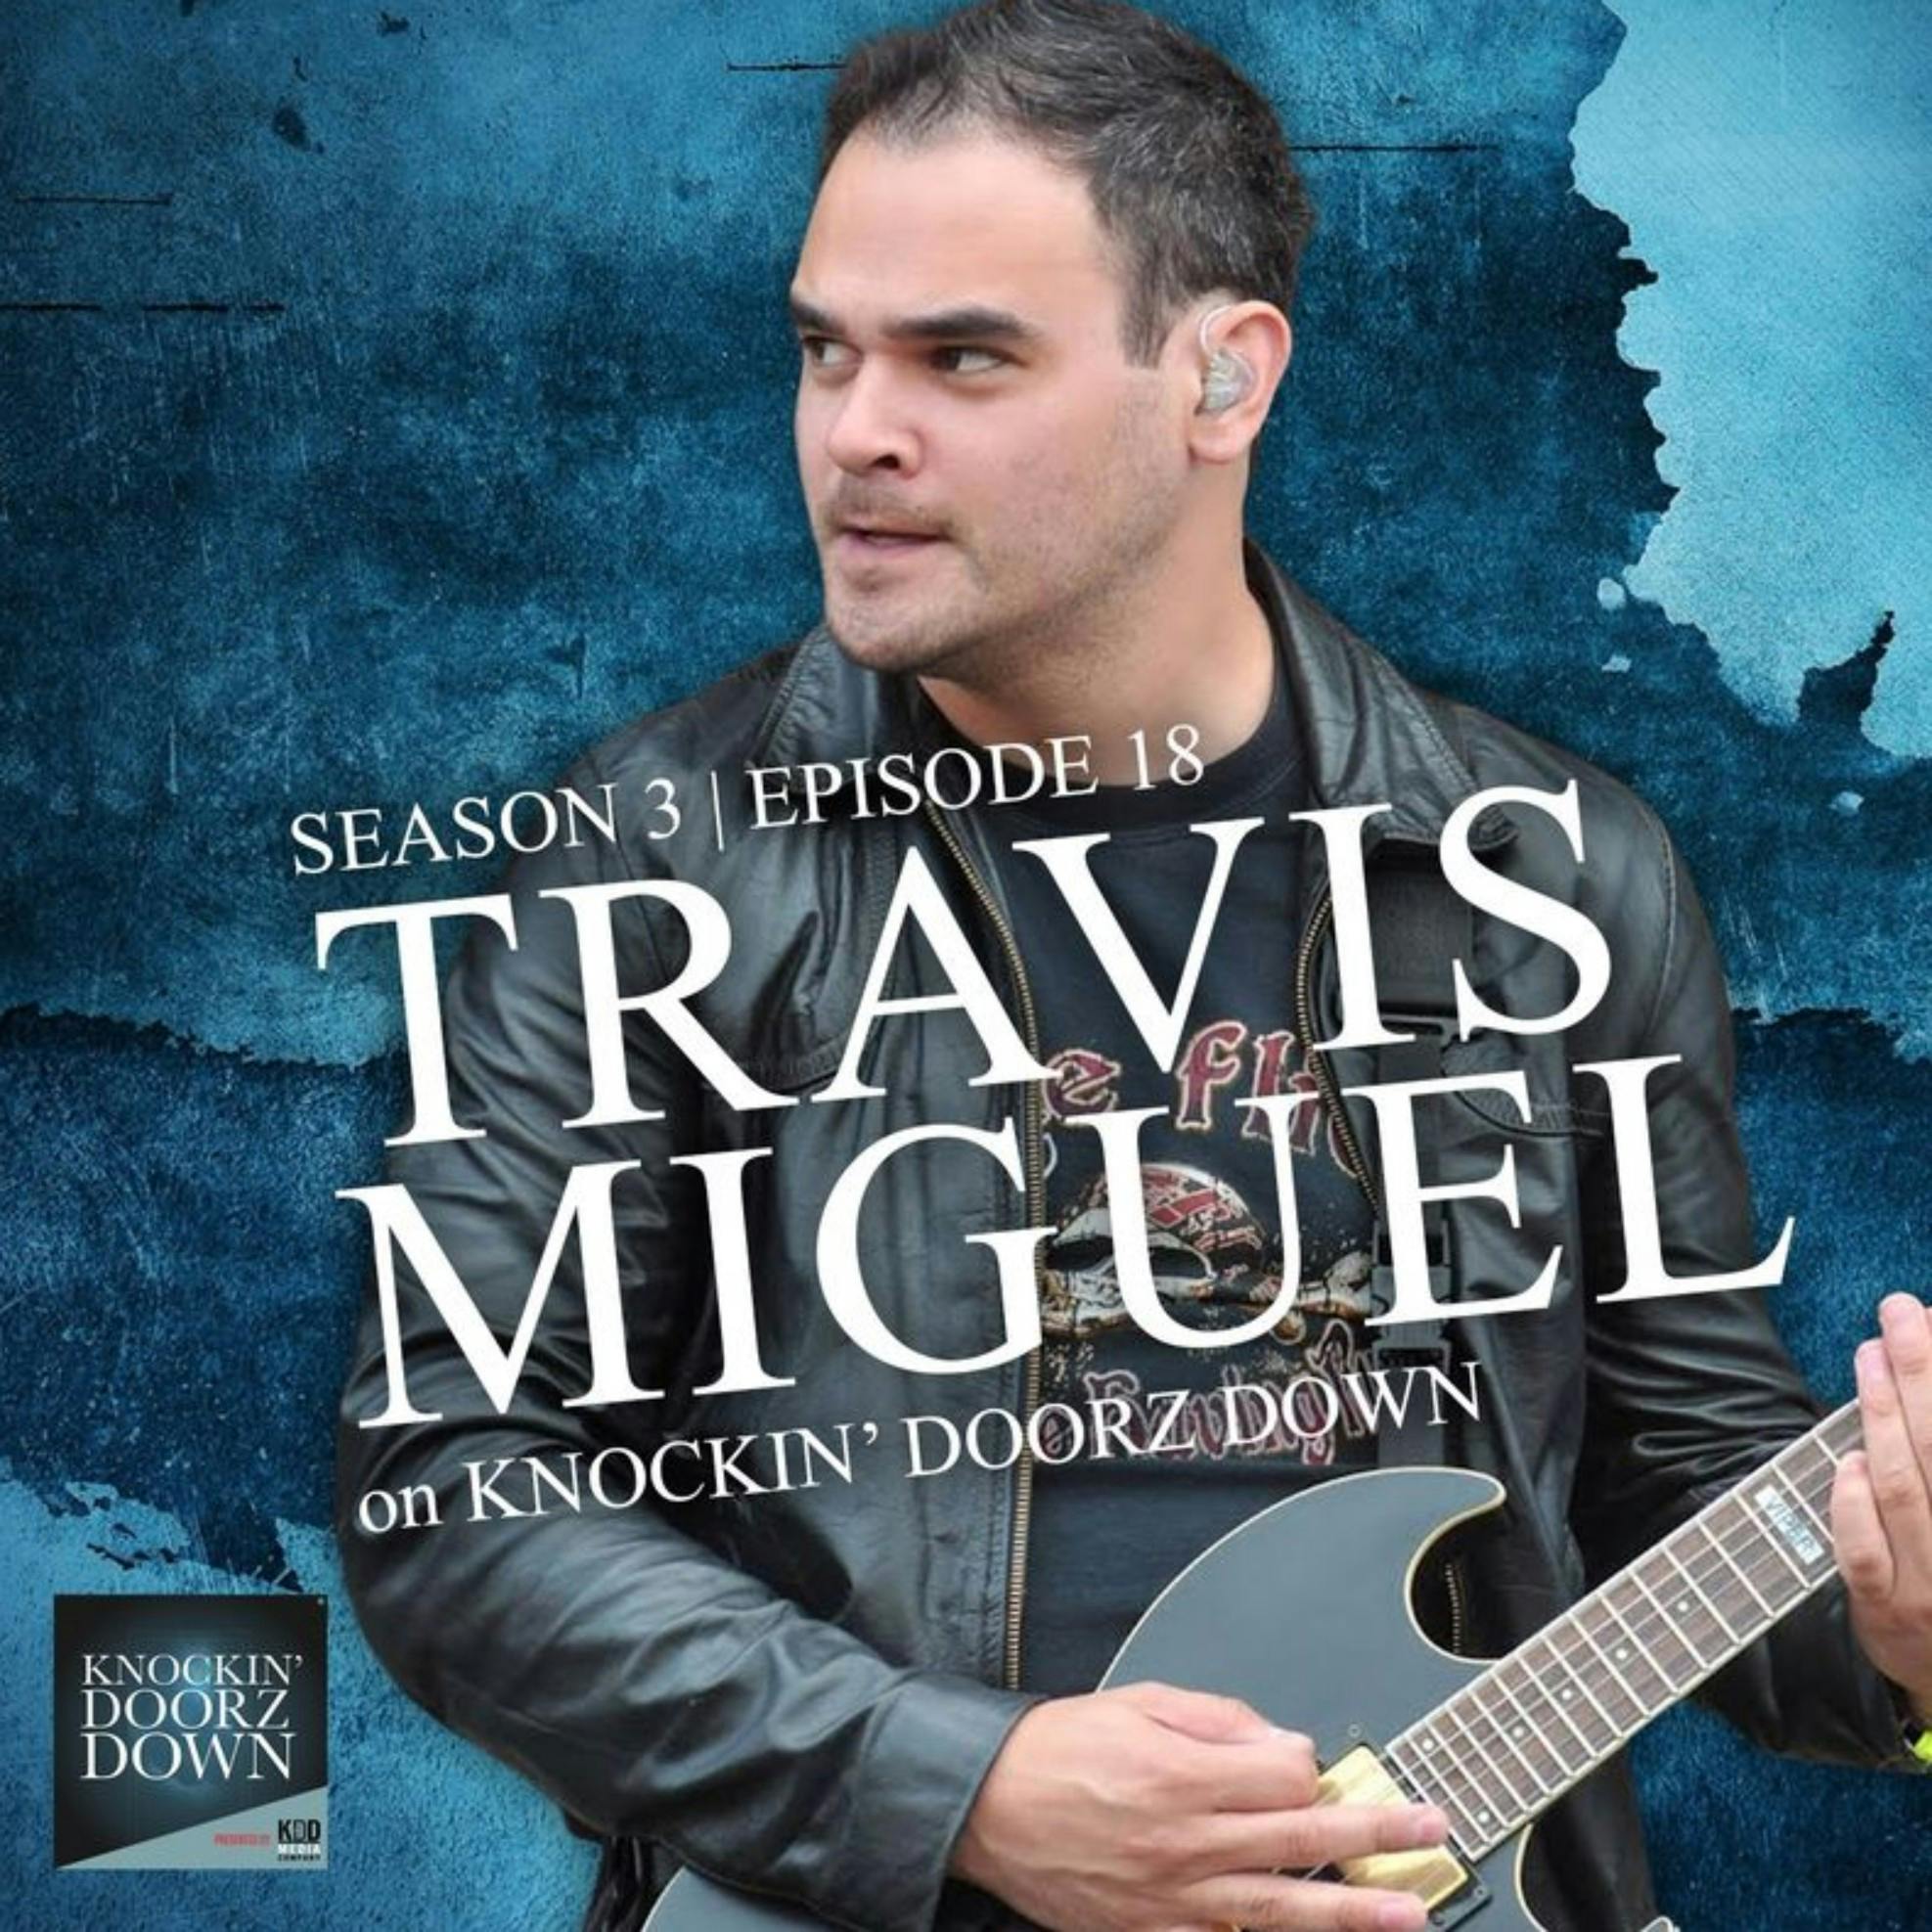 Travis Miguel |The Band Atreyu, The Rock Music Scene & Alcohol, Sobriety, Anxiety and Depression